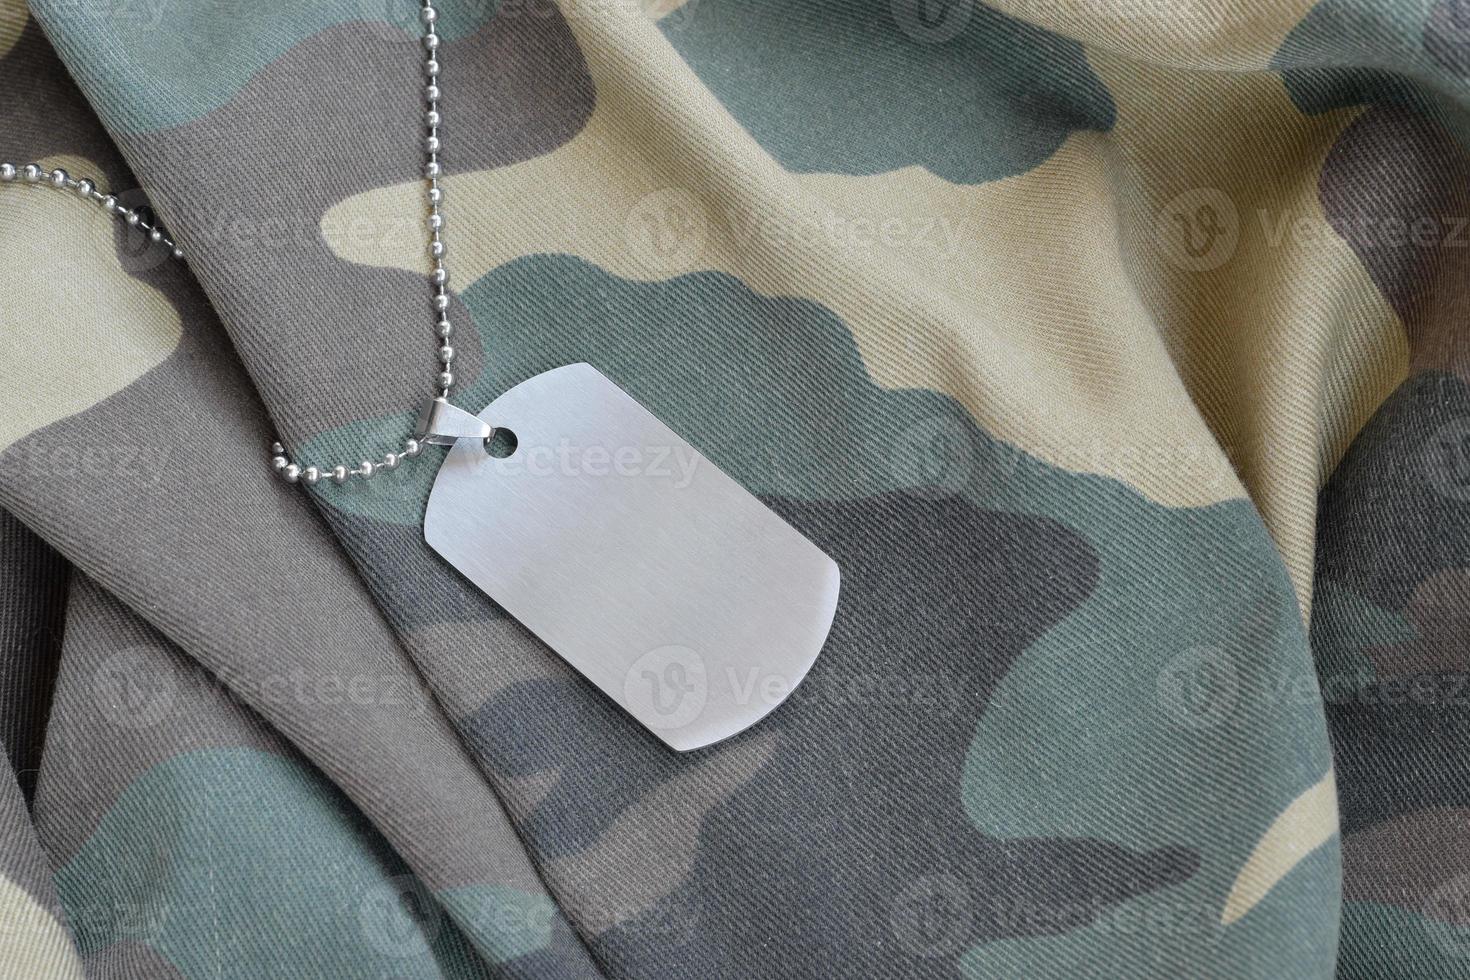 Silvery military beads with dog tag on camouflage fatigue uniform photo